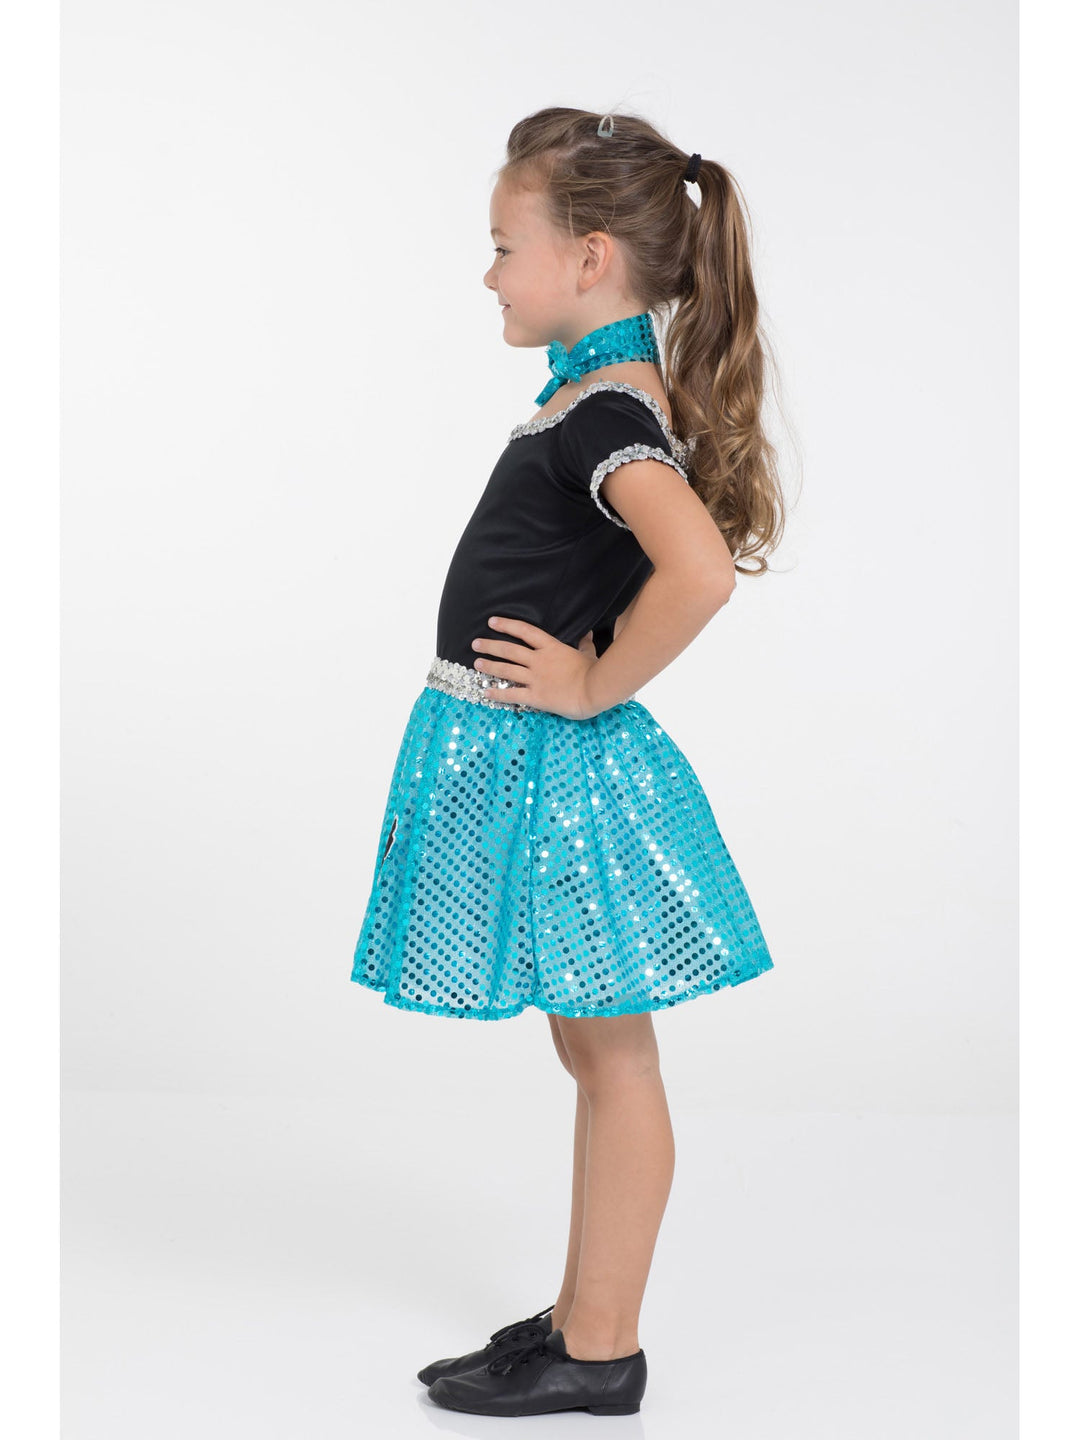 Rock and Roll Sequin Dress Turquoise Poodle Girl Costume_2